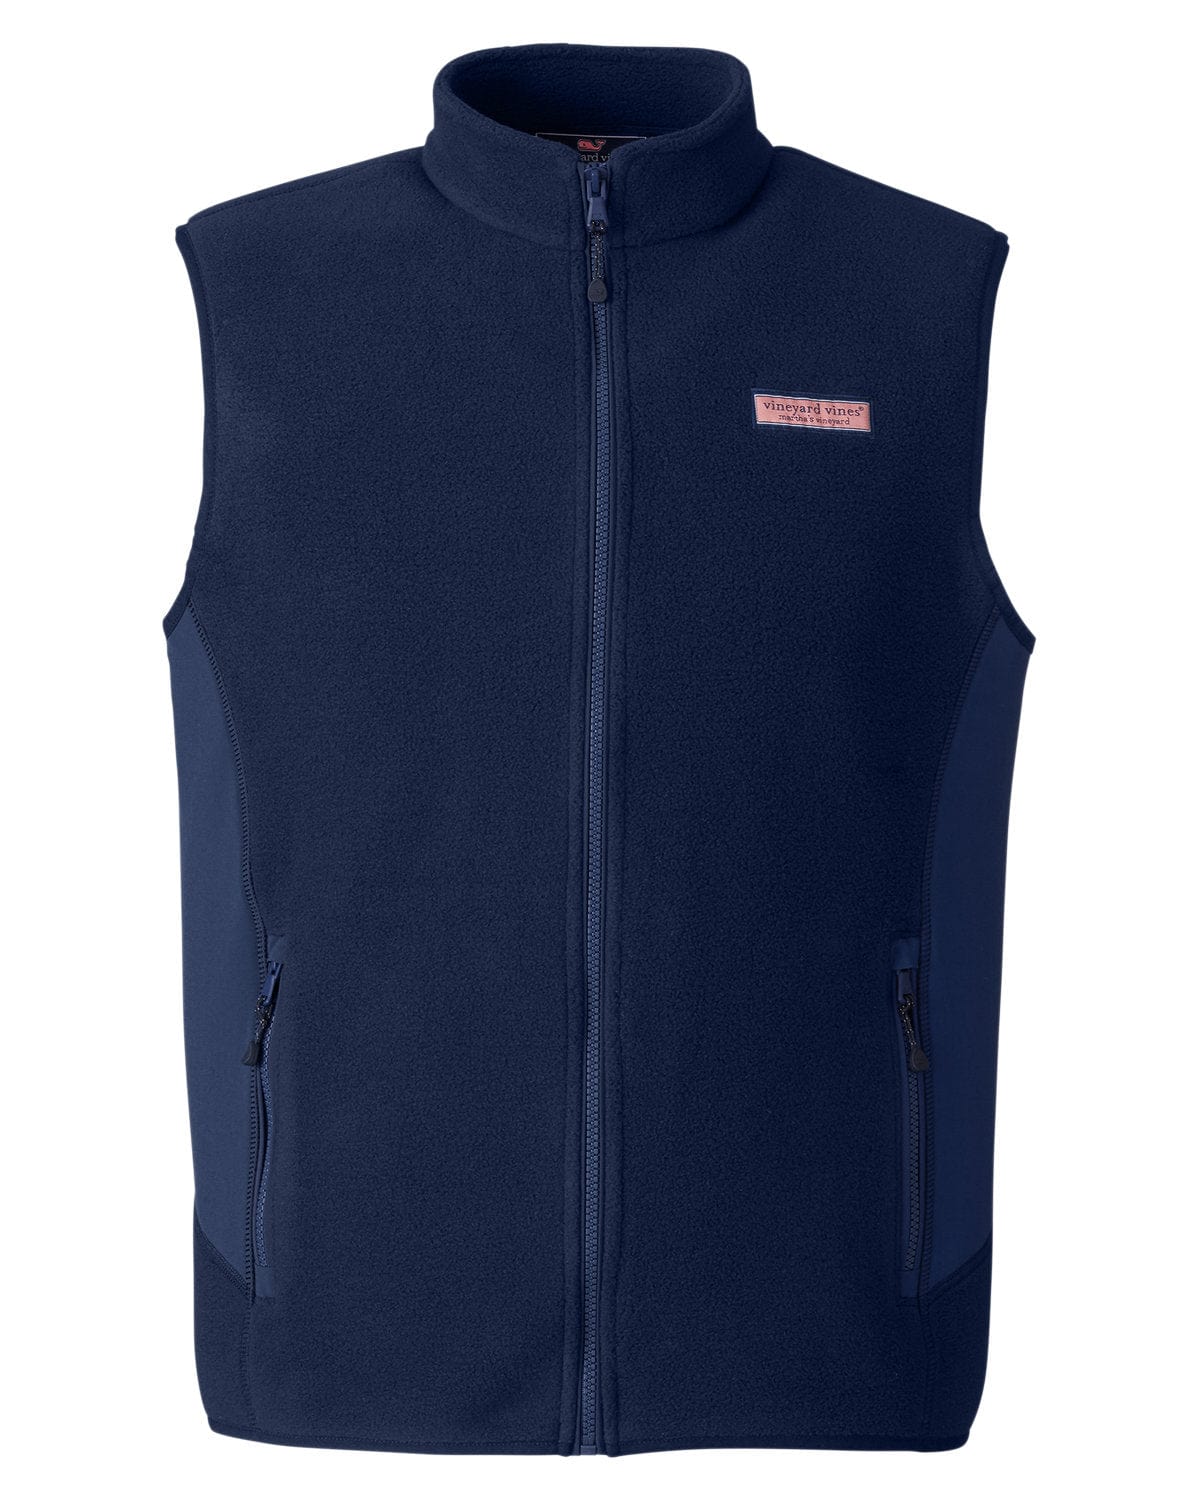 Vineyard Vines Holiday Vest  Connecticut Fashion and Lifestyle